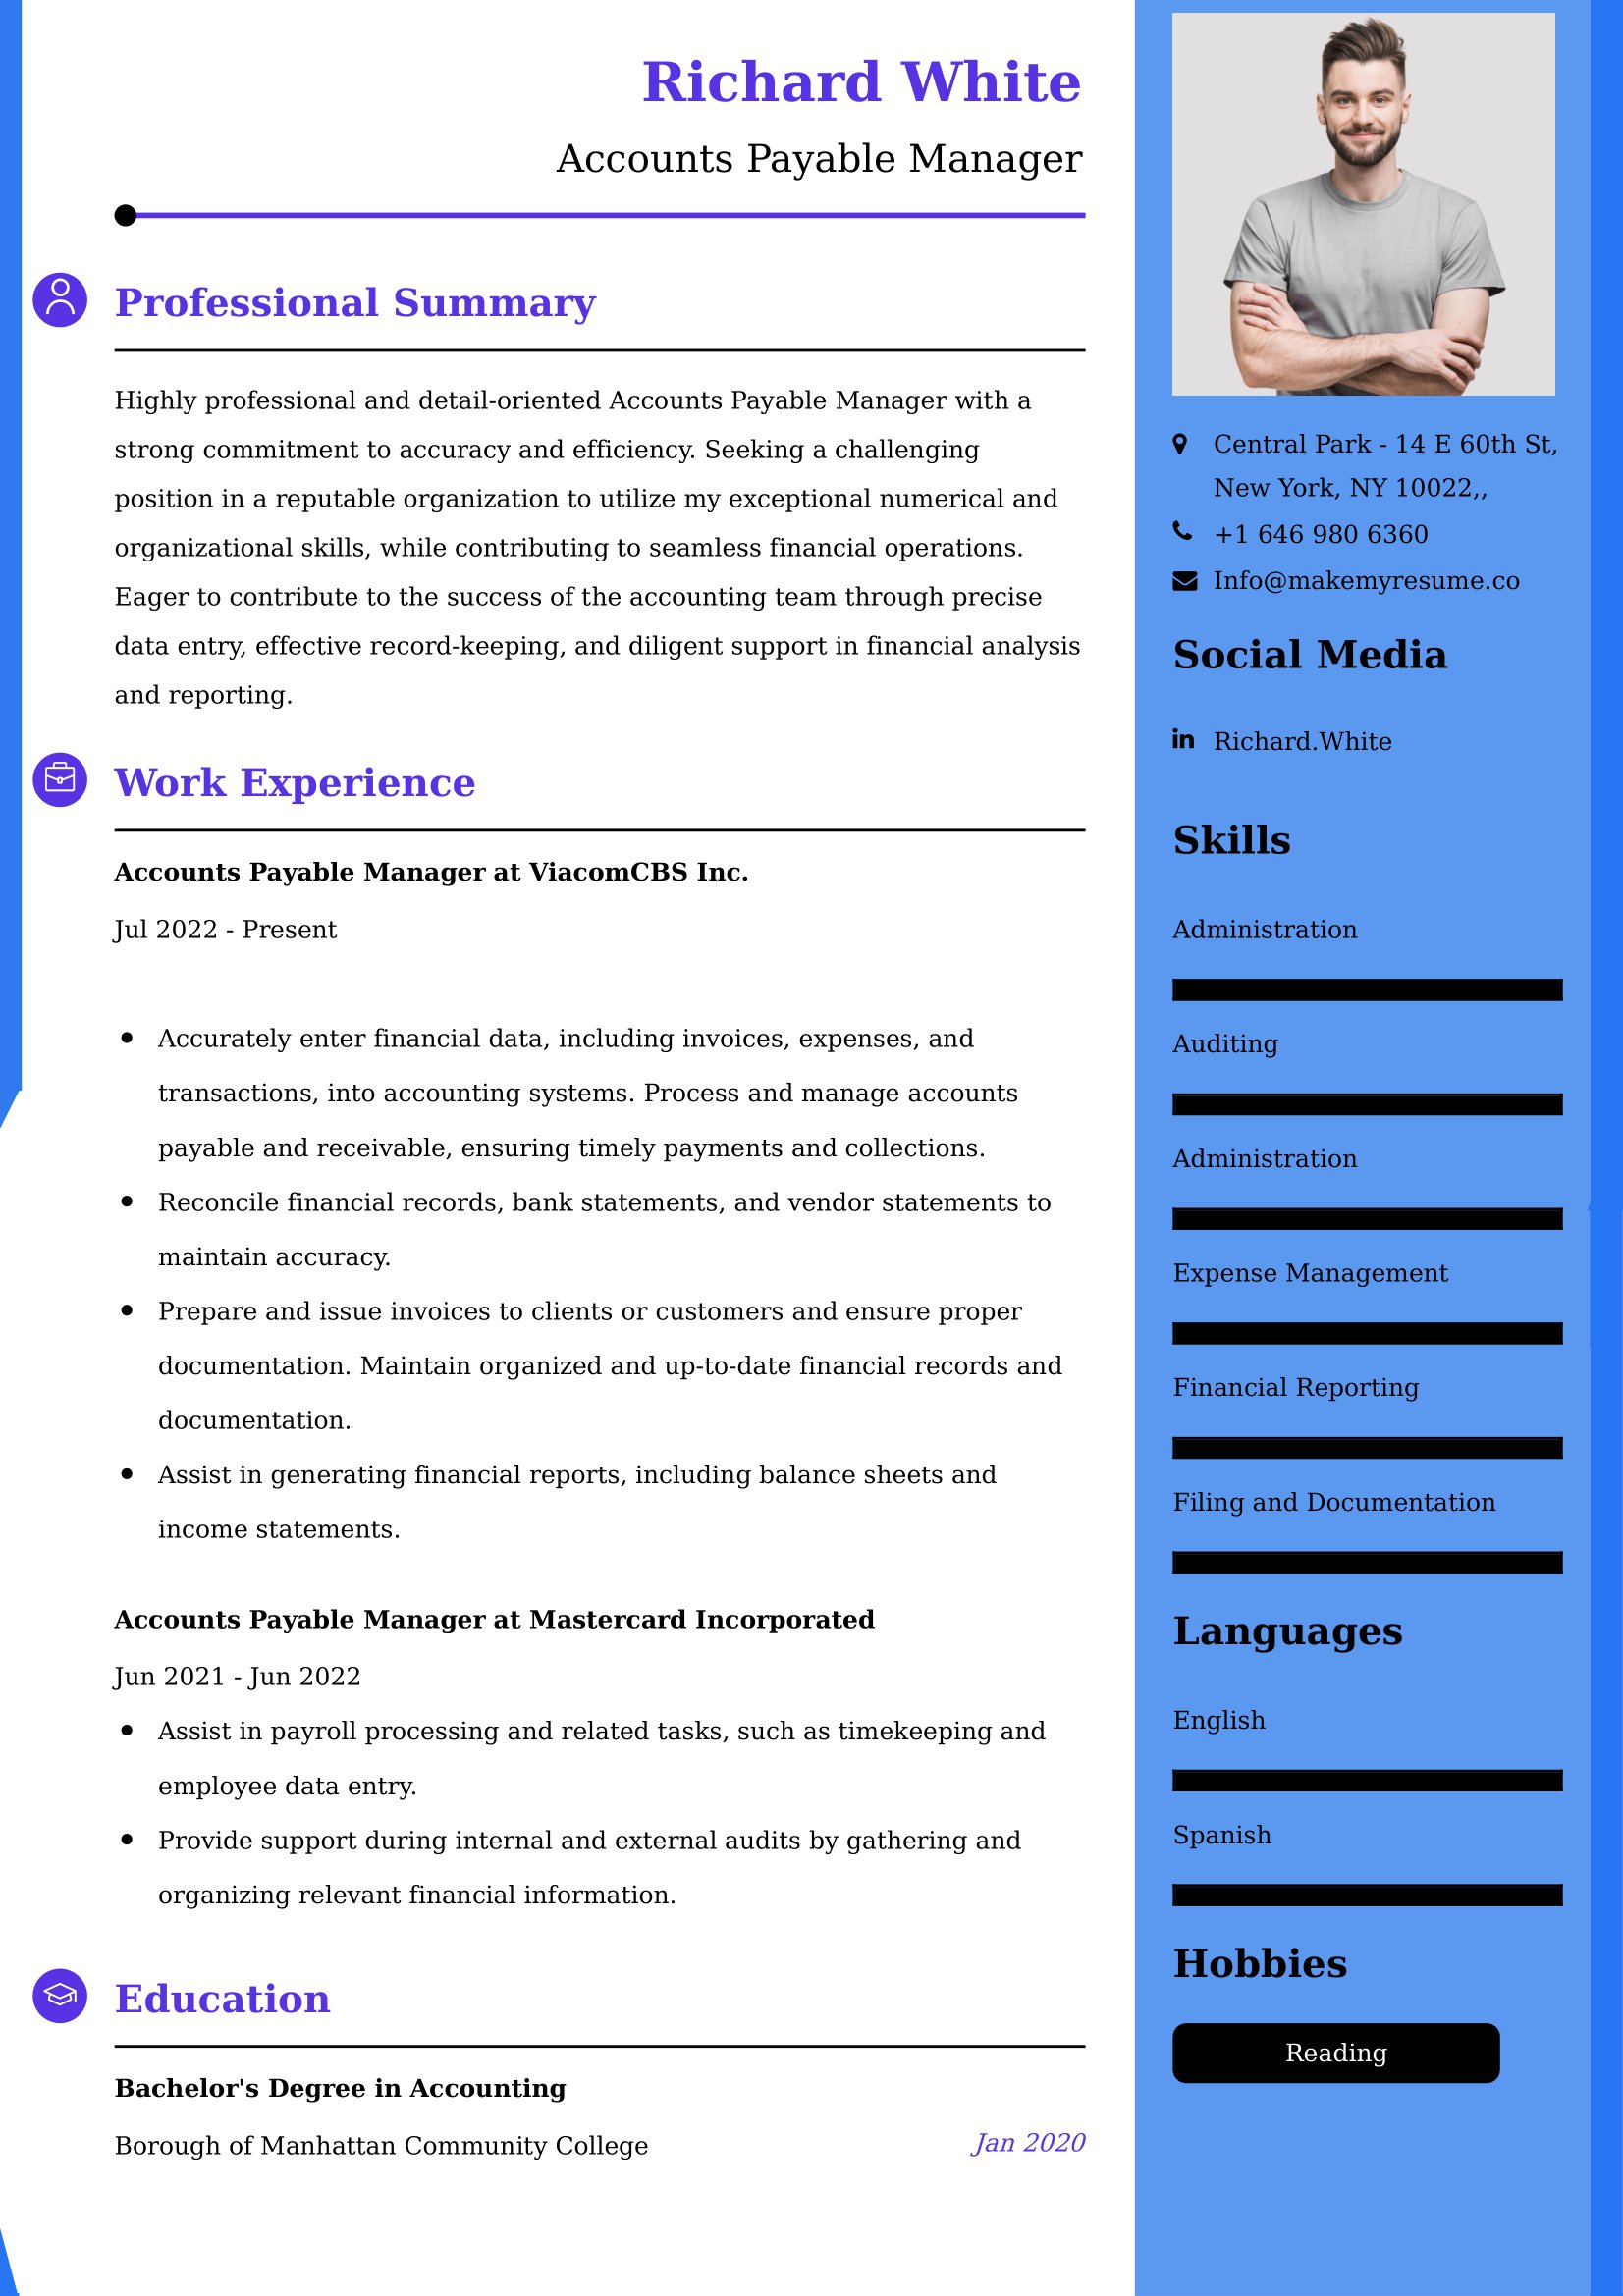 Accounts Payable Manager Resume Examples - Brazilian Format, Latest Template